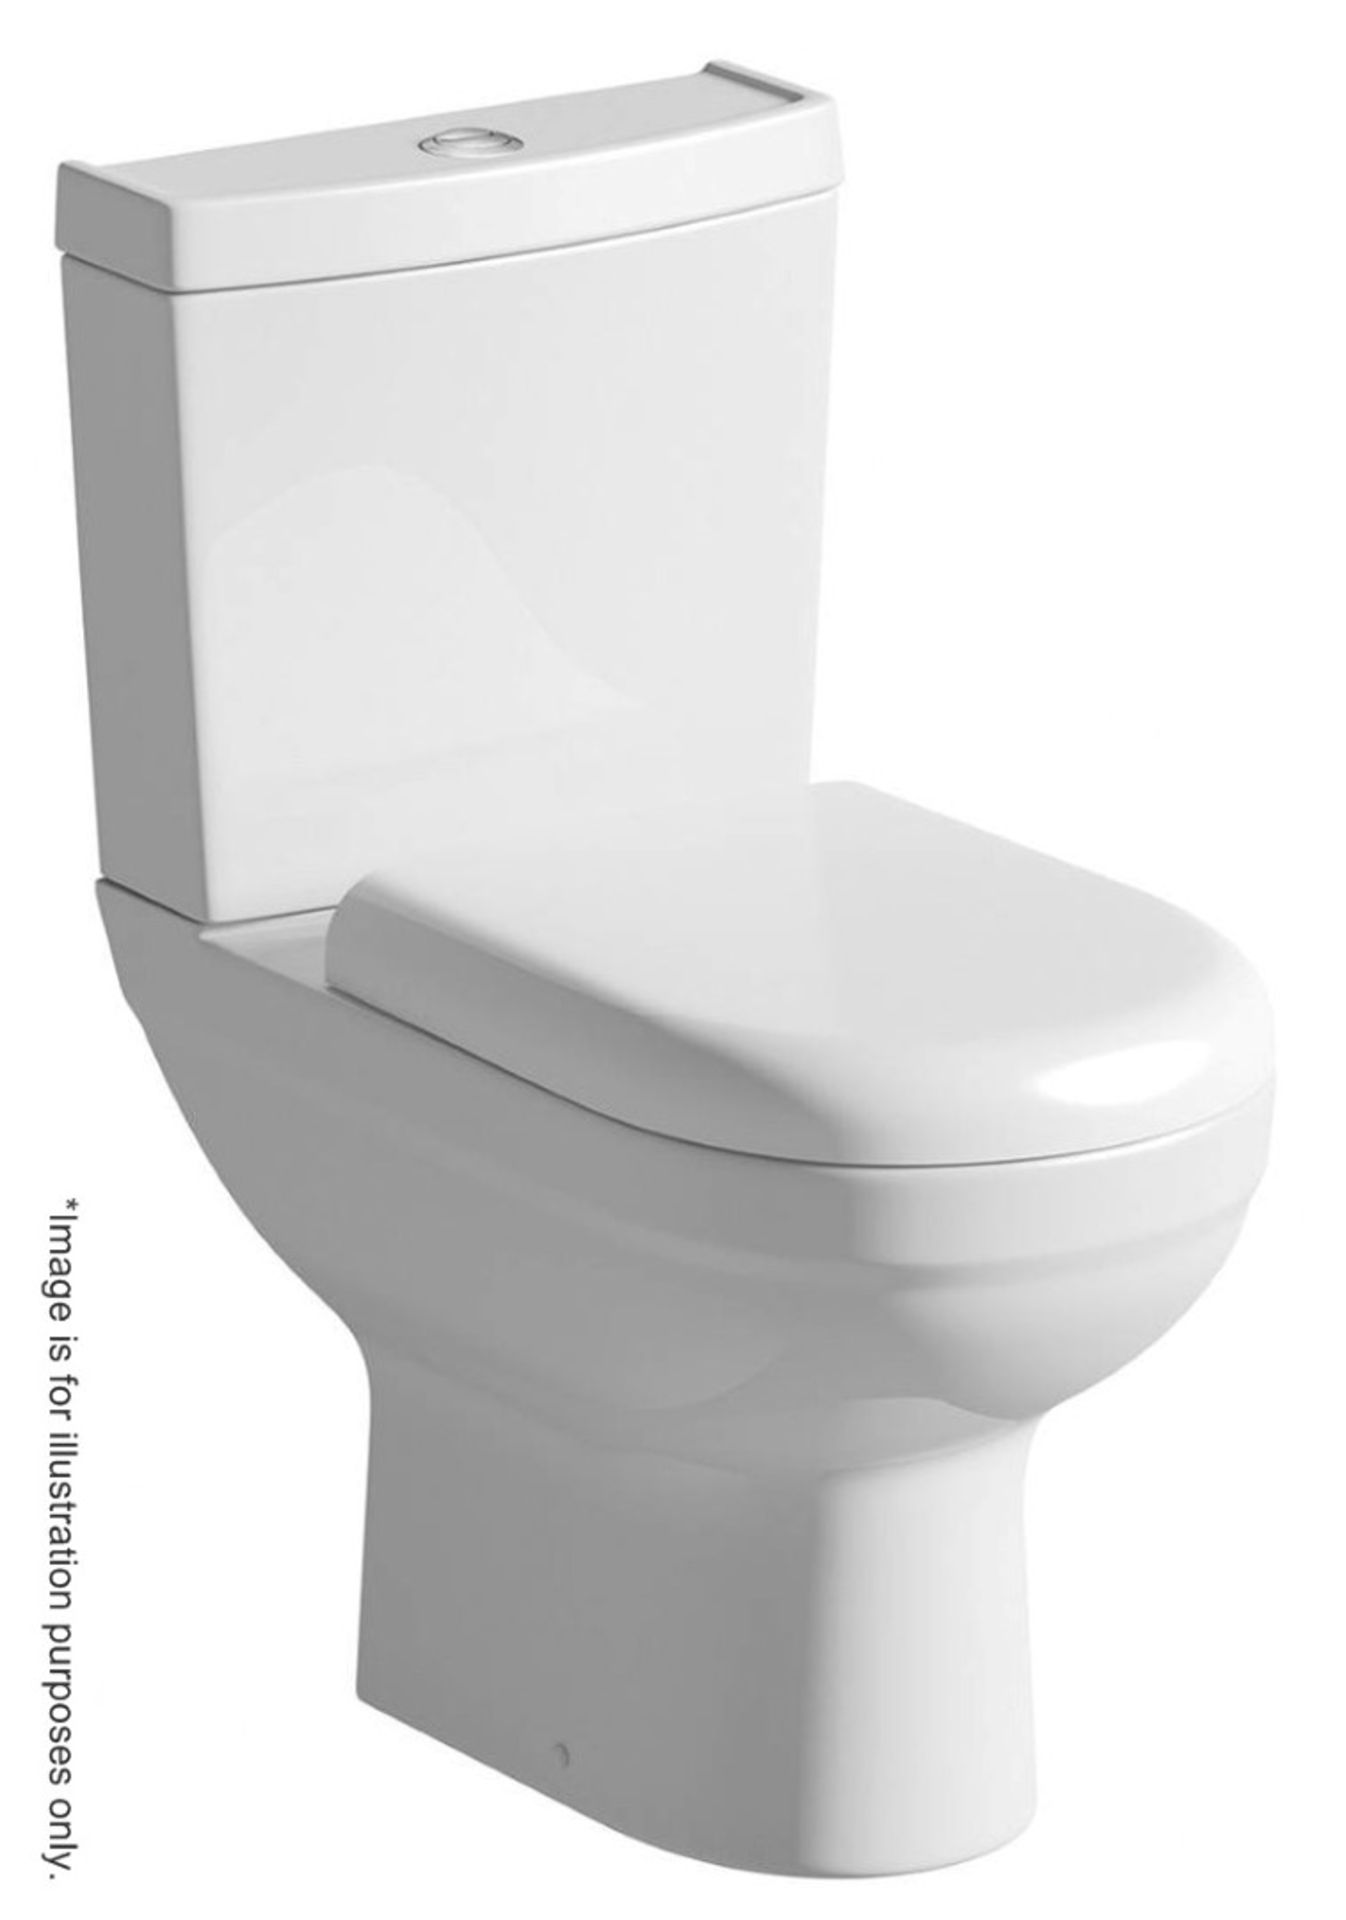 1 x COMO Close Coupled Toilet With Cistern + Soft Close Toilet Seat - Ref: GMJ016A - Unused - Image 2 of 3